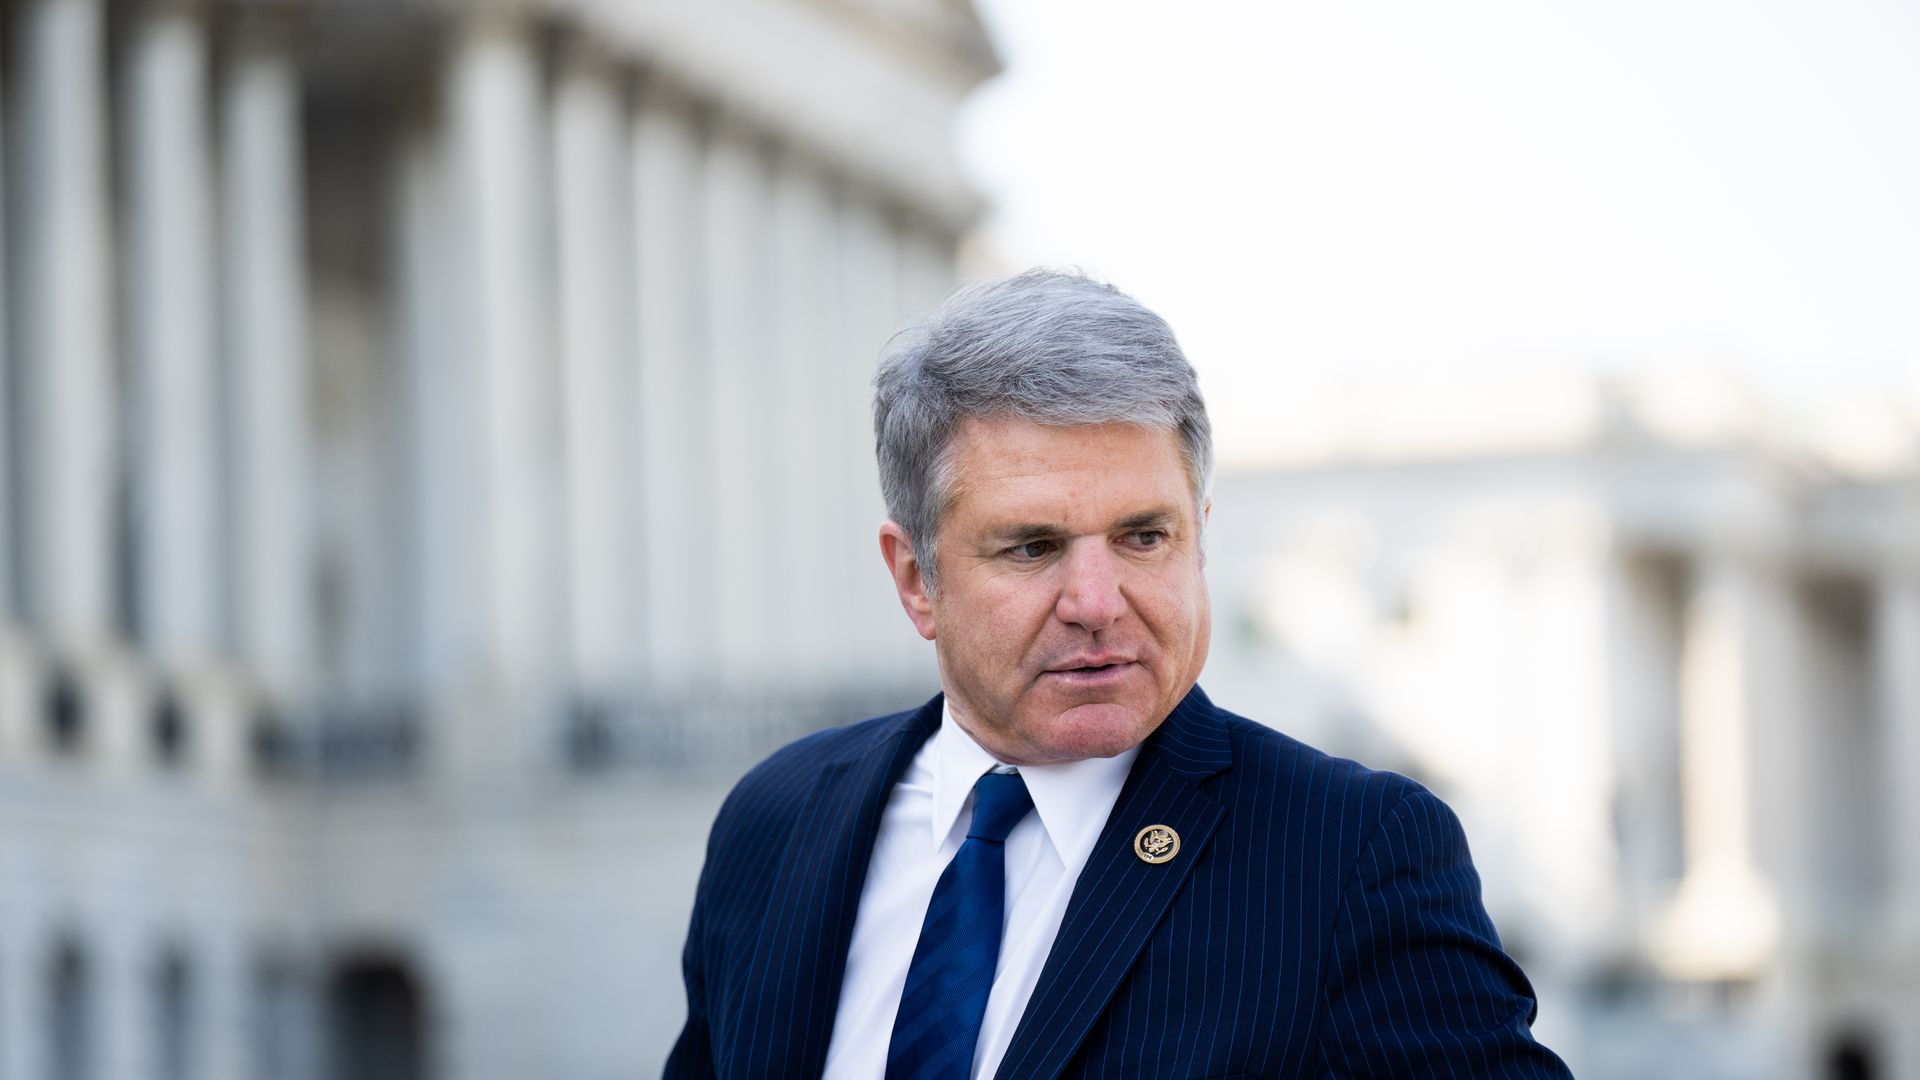 Rep. Michael McCaul, wearing a blue pinstripe suit, white shirt and blue tie, stands in front of the Capitol.